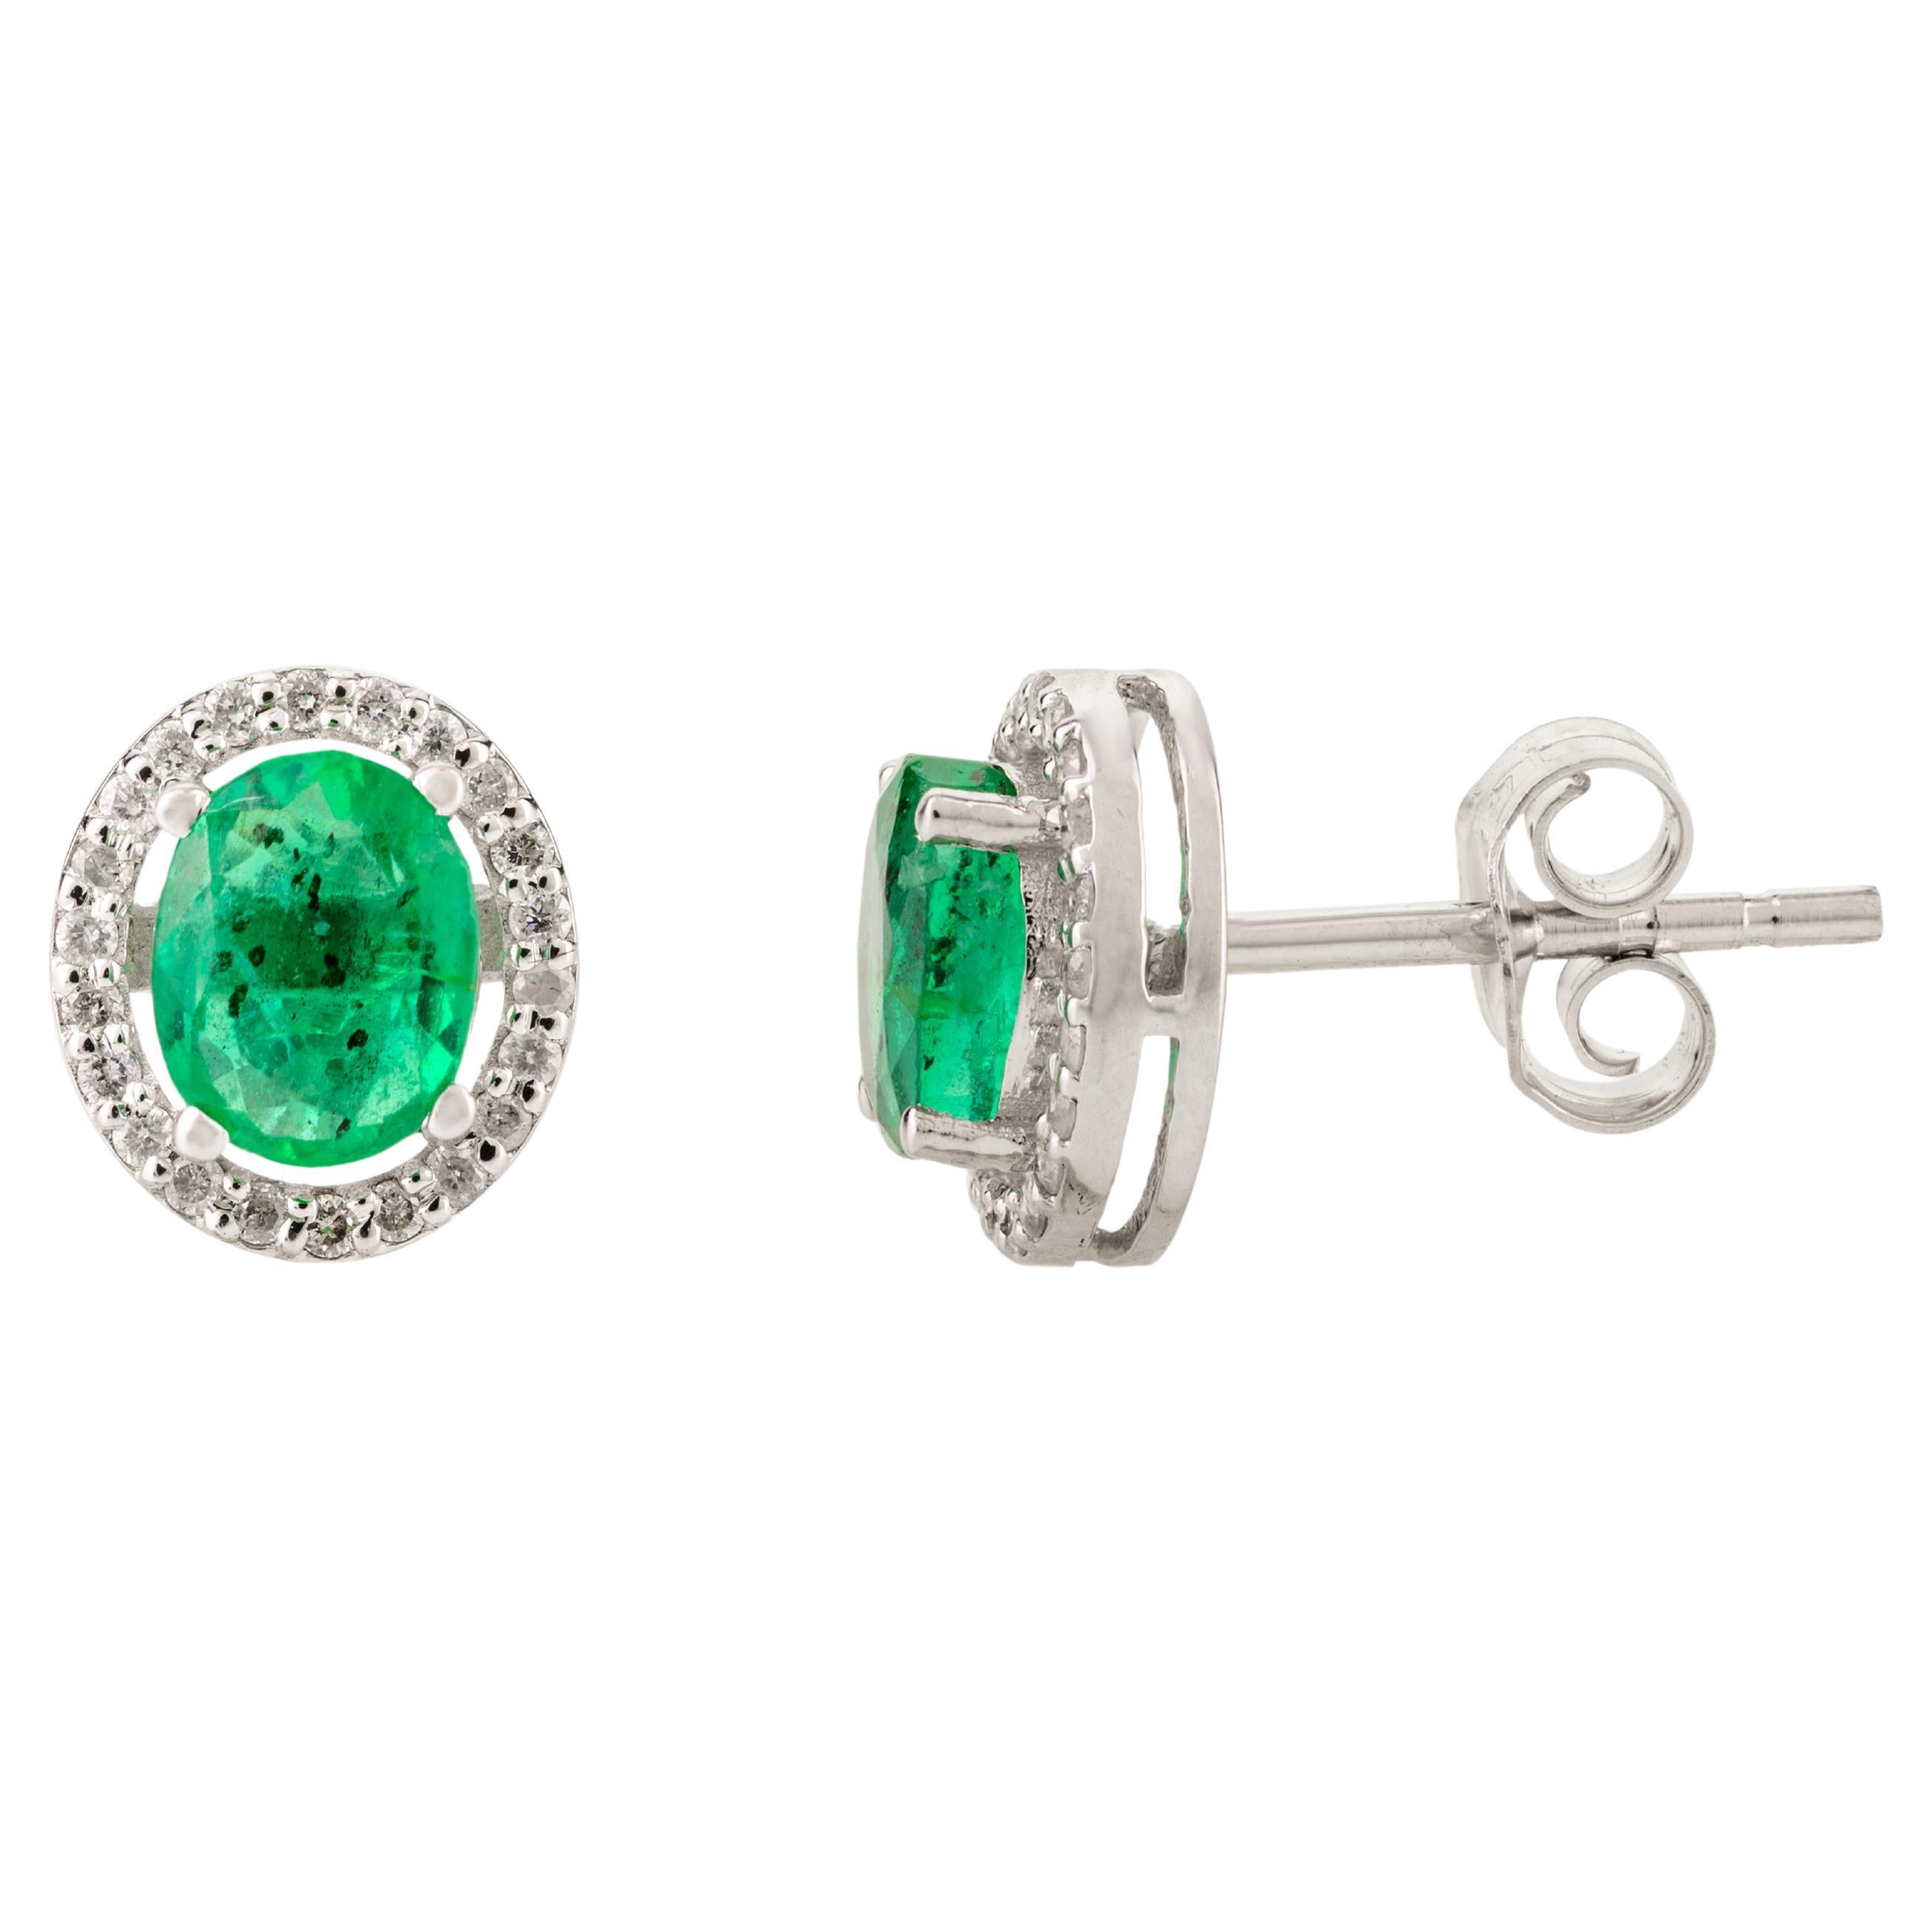 Natural Emerald Diamond Halo Oval Stud Earrings in 14k White Gold Gift for Mom